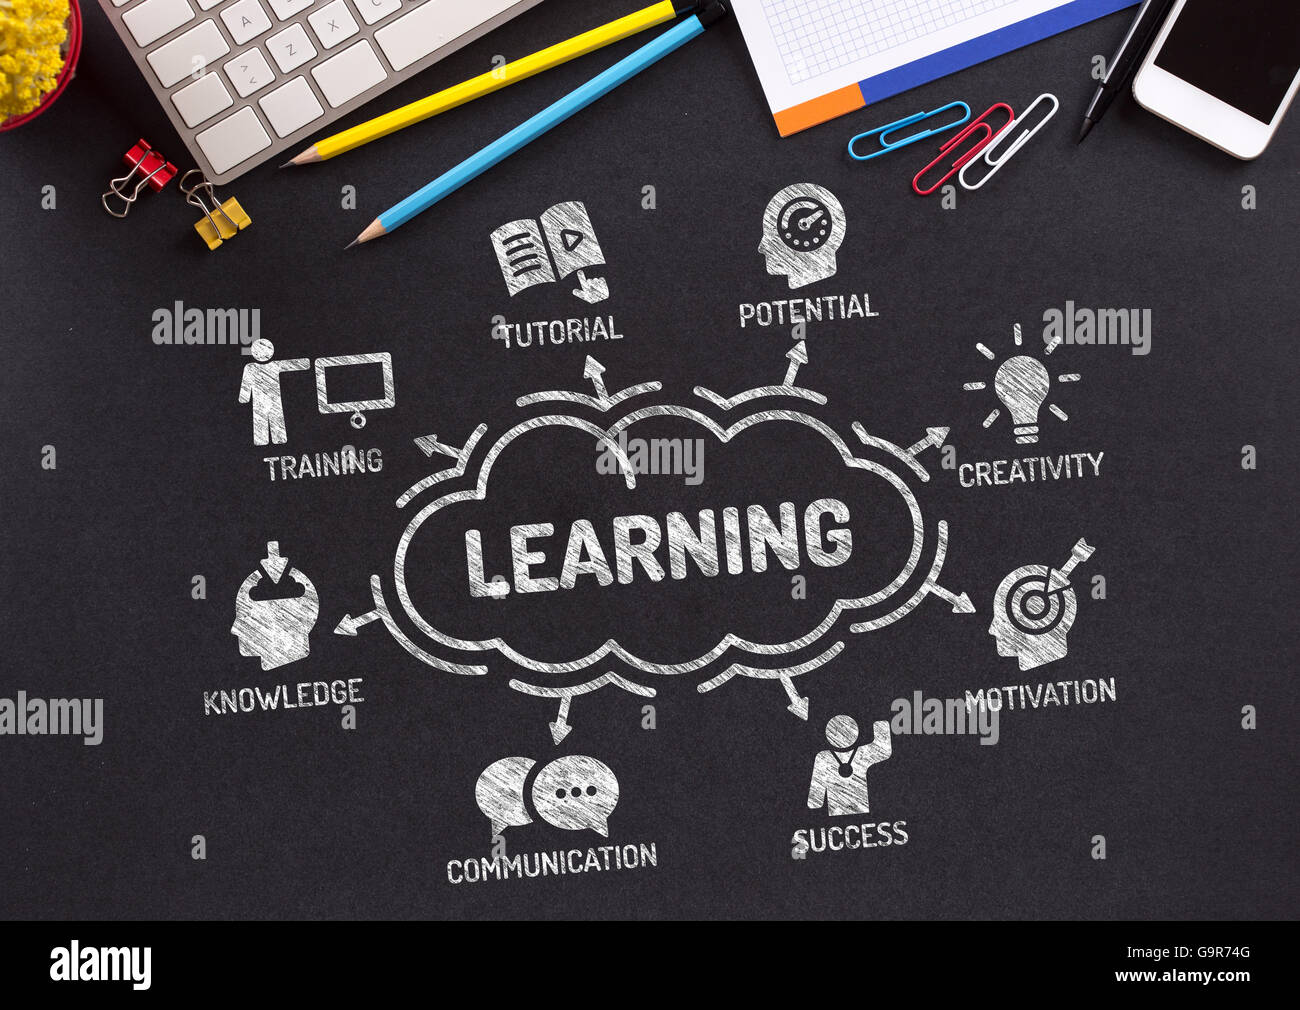 Learning Chart with keywords and icons on blackboard Stock Photo